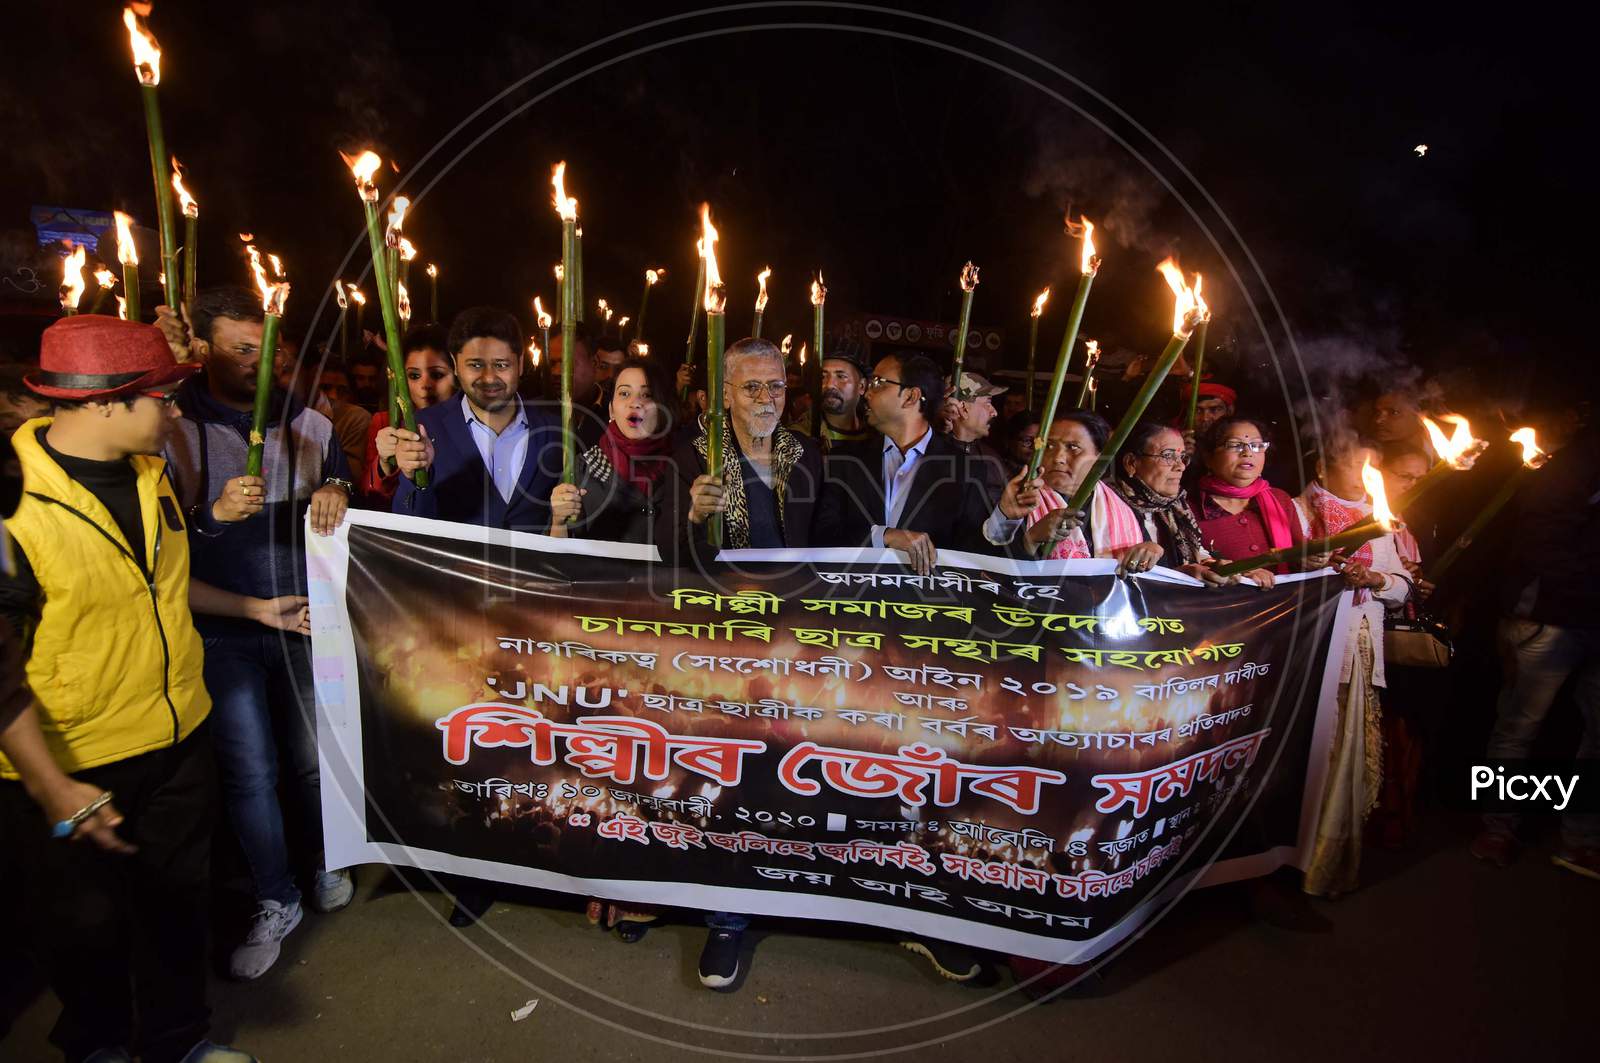 Activists of All Assam Students Union (AASU) along with 30 Ethnic Organisation taking out a torch light rally protest against Citizenship Amendment Act (CAA) in Assam